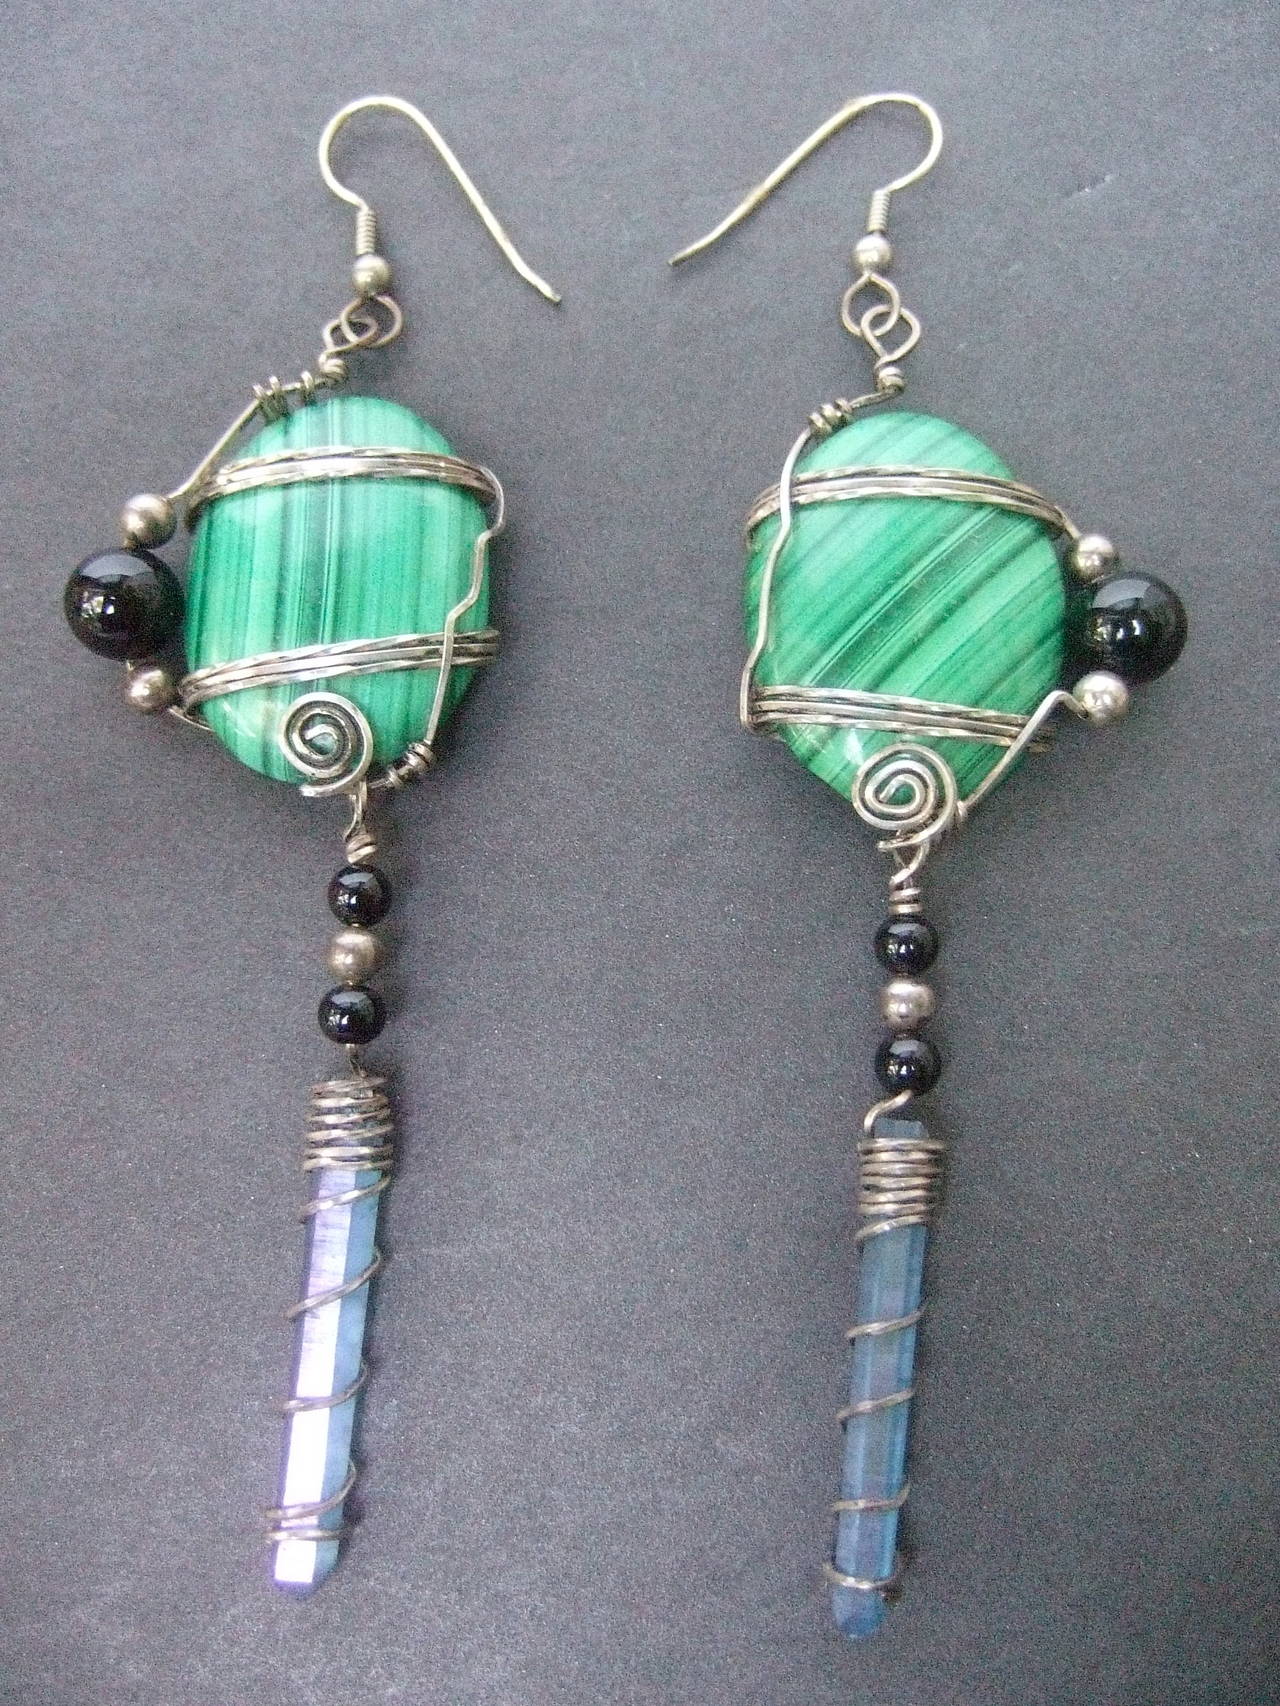 Sterling malachite crystal artisan dangle earrings
The unique handmade earrings are designed
with oval shaped malachite cabochons

The malachite cabochons are accented 
with sterling wire bands that wrap around
the stones

The malachite